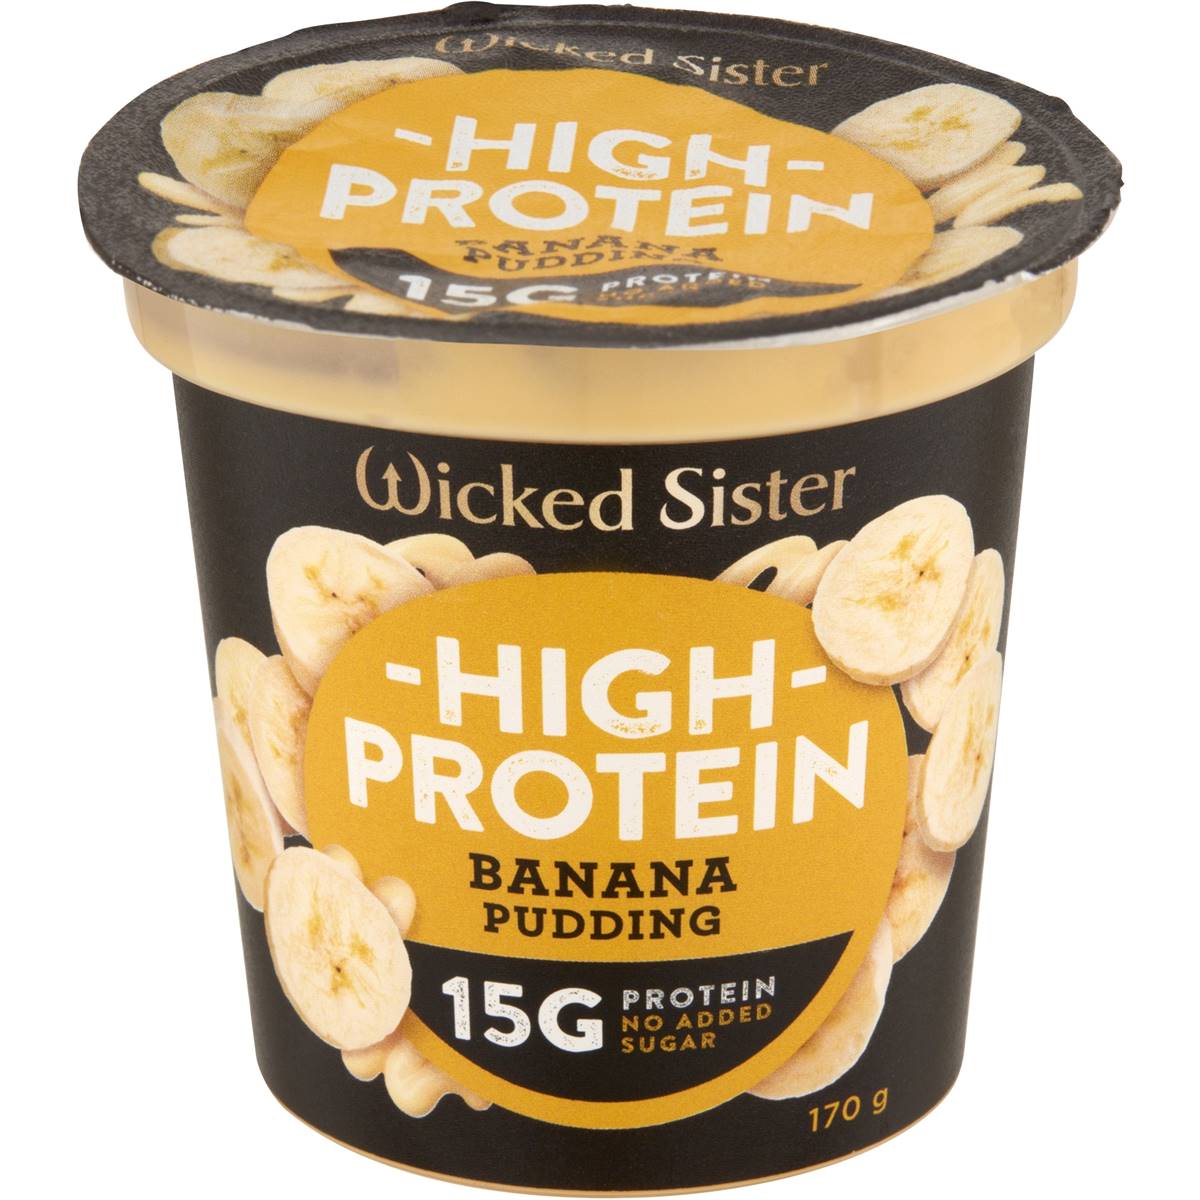 Calories in Wicked Sister High Protein Banana Pudding